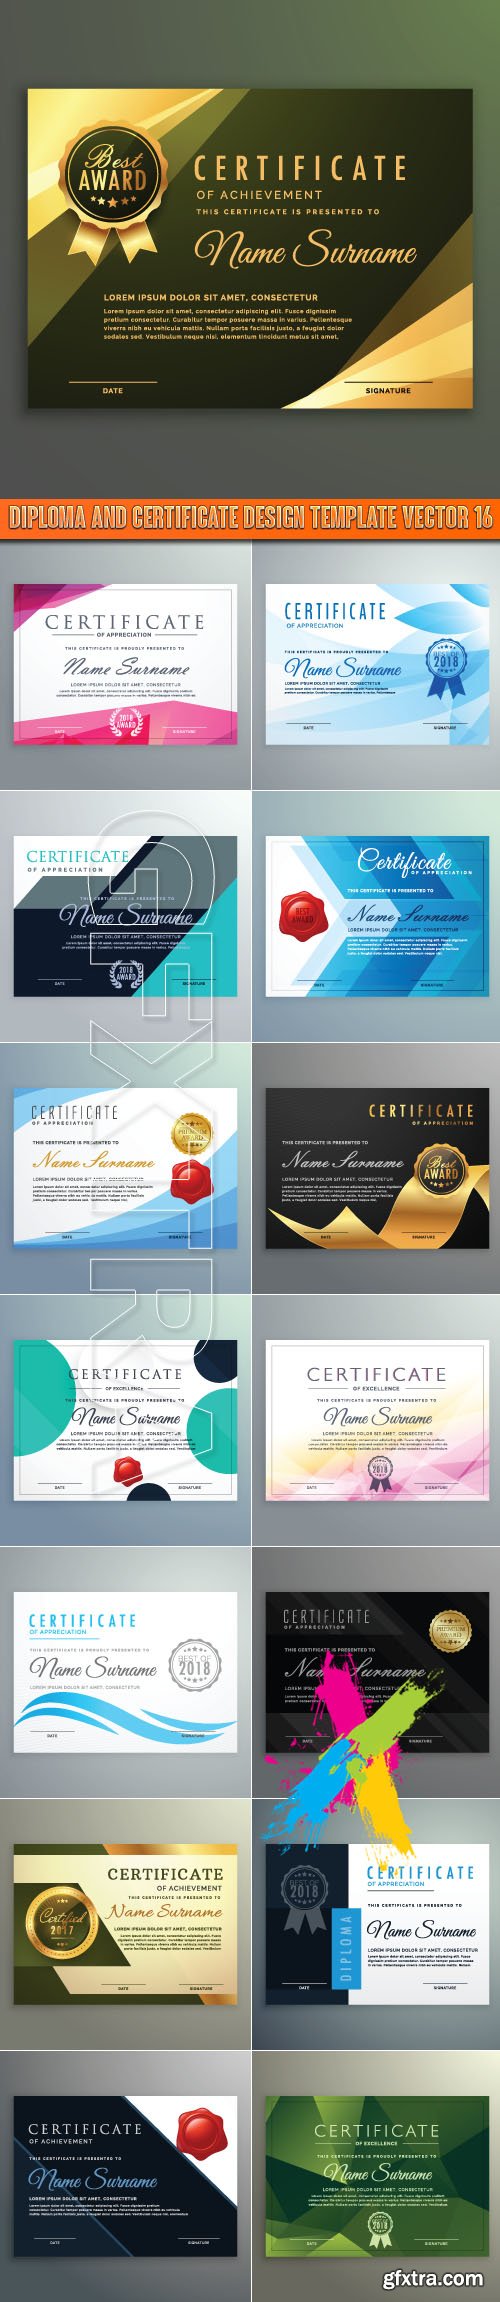 Diploma and certificate design template vector 16